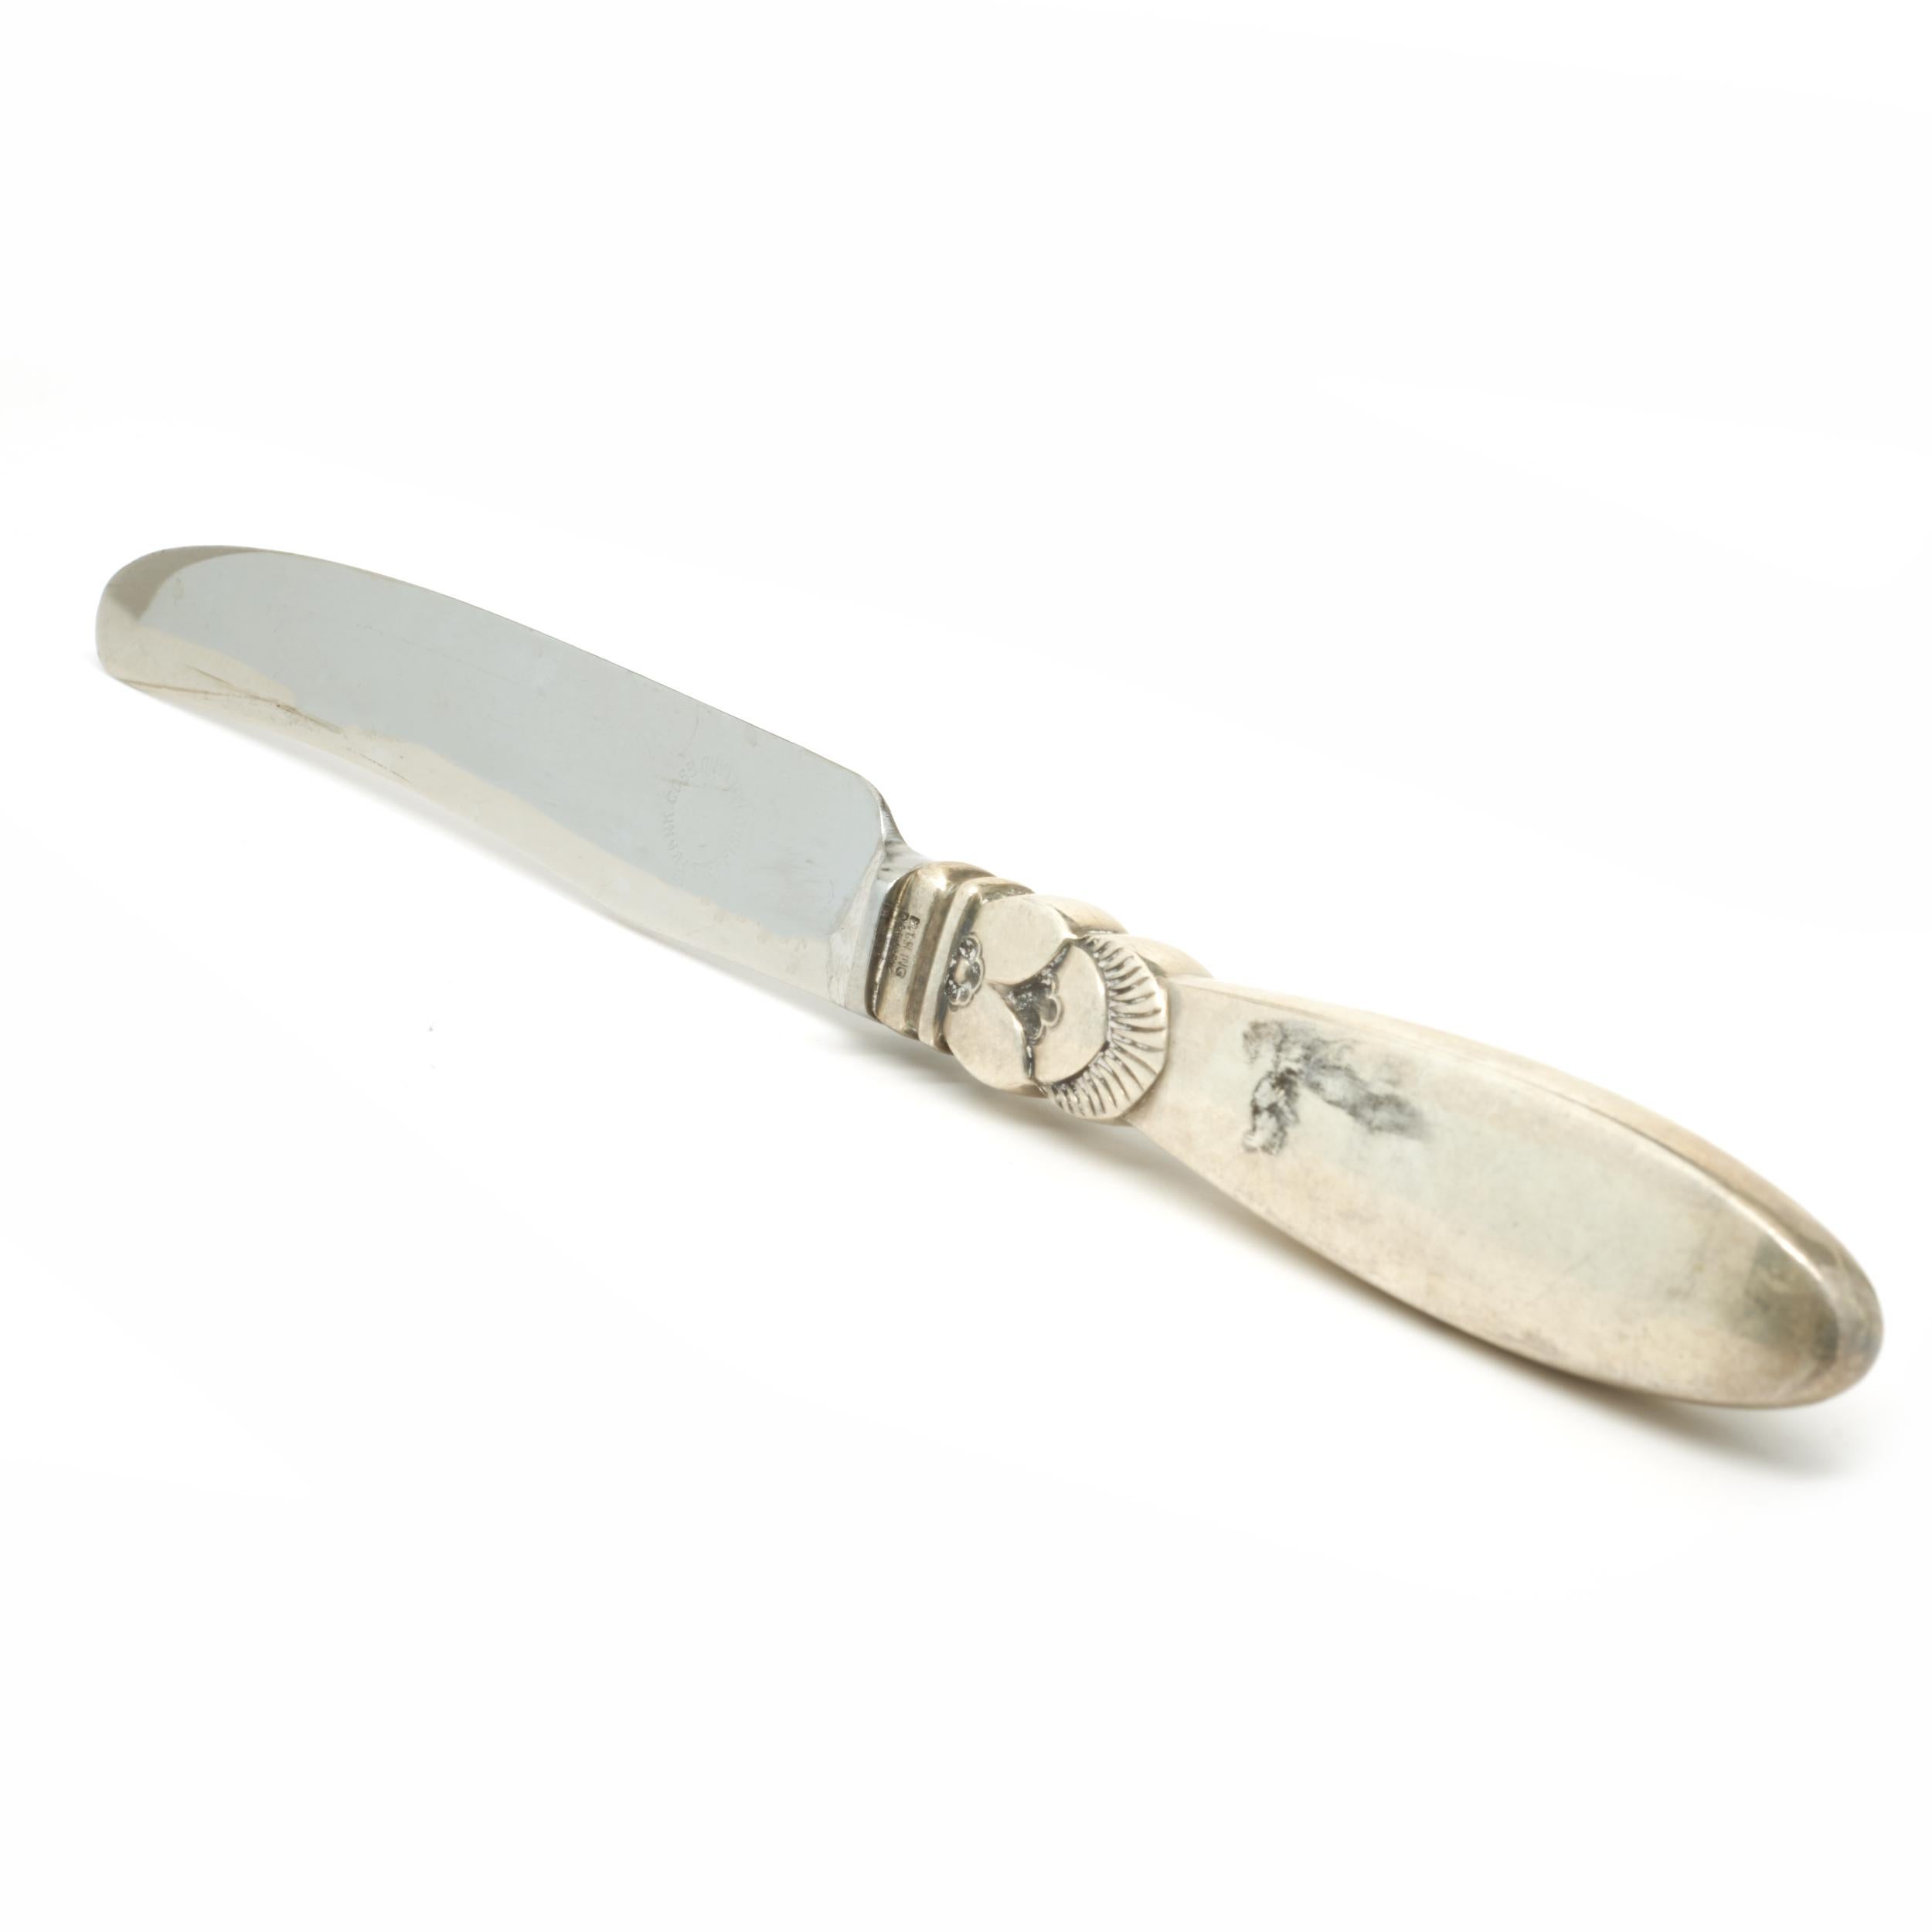 Designer: Georg Jensen
Material: stainless steel and sterling silver
Dimensions: butter knives measure 7 X 5/8”
Weight: SET = 450.83 grams

